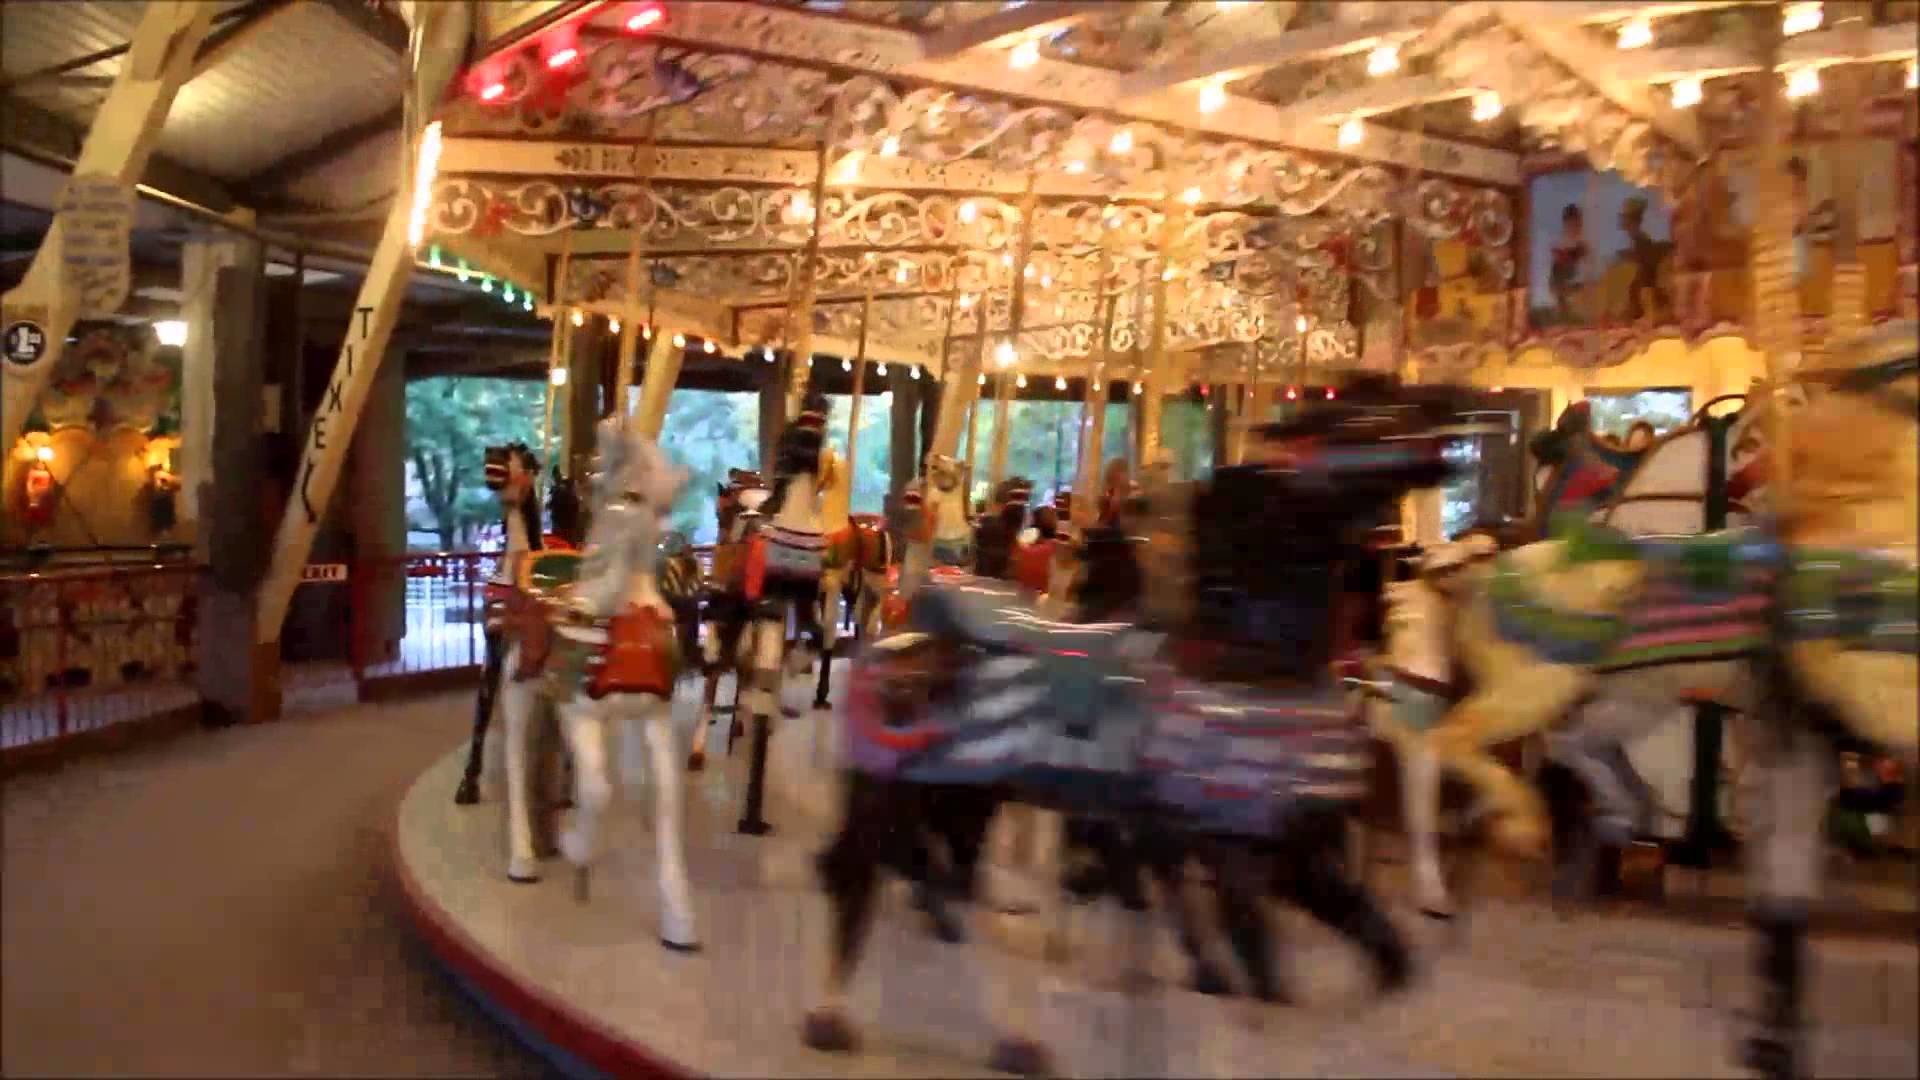 1920x1080 Trenten on the Merry Go Round at Knoebels October 10th 2014